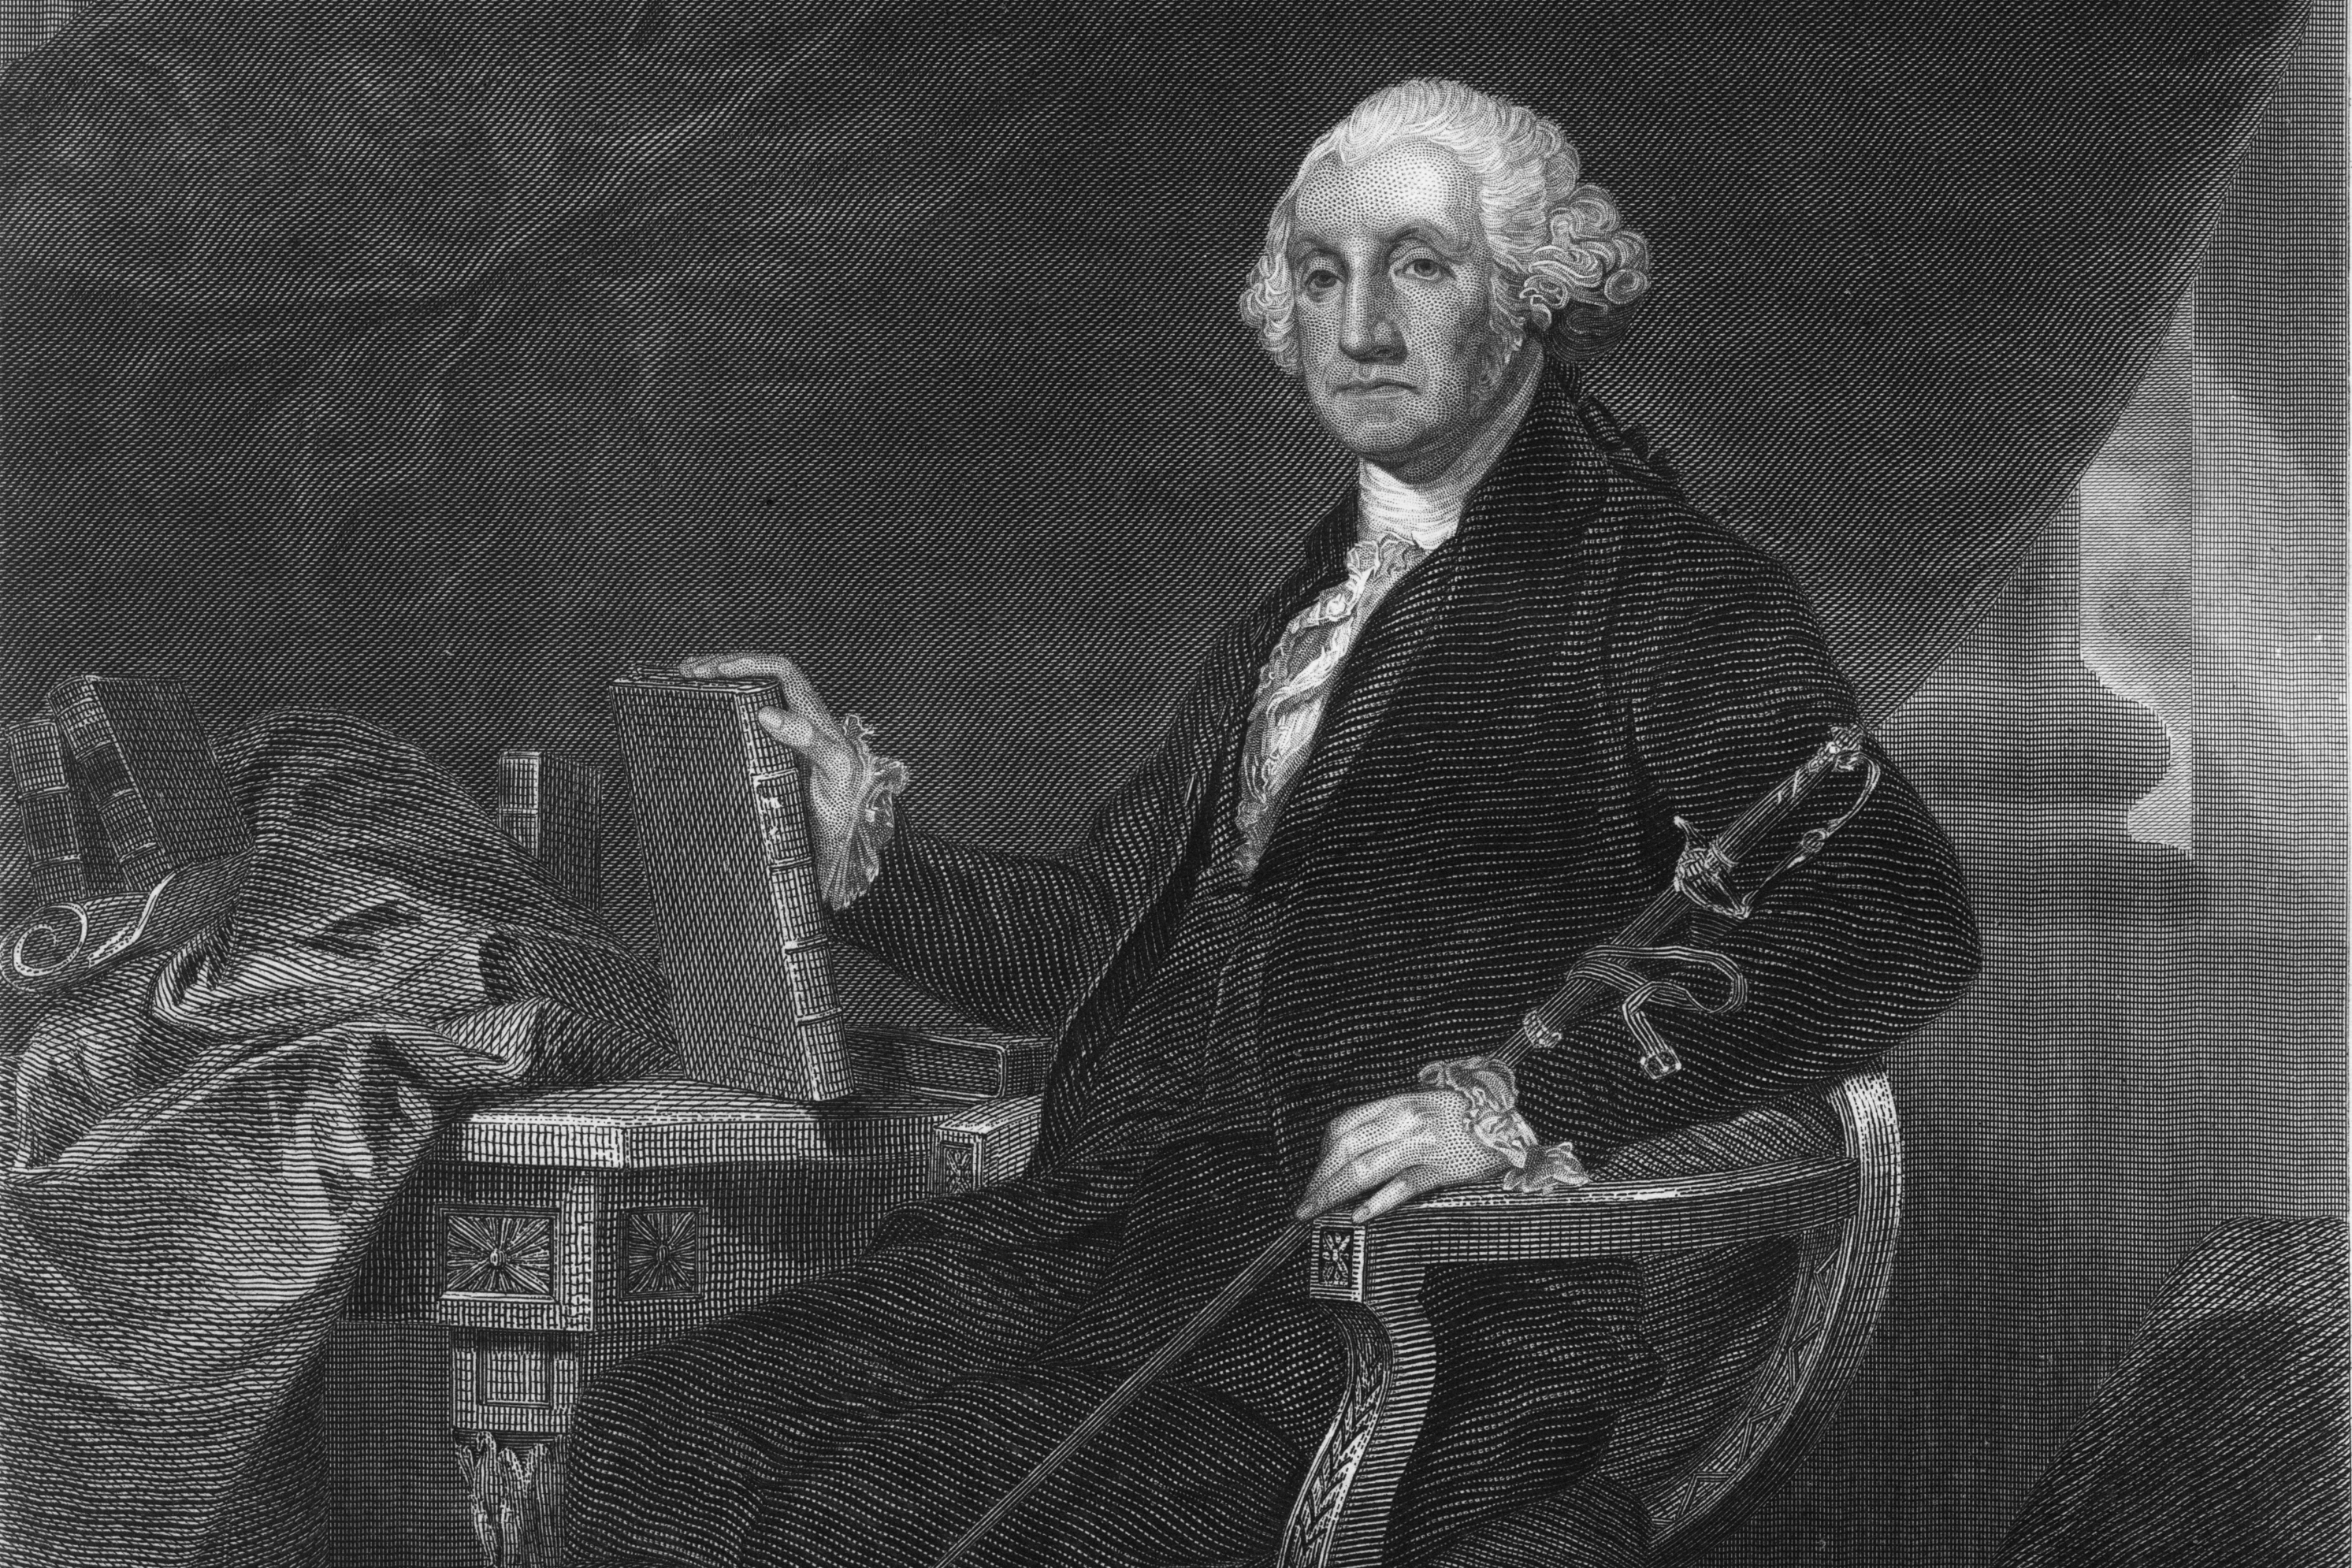 George Washington from the National Portrait Gallery of Eminent Americans, Vol. I, 1862. (iStock Image)